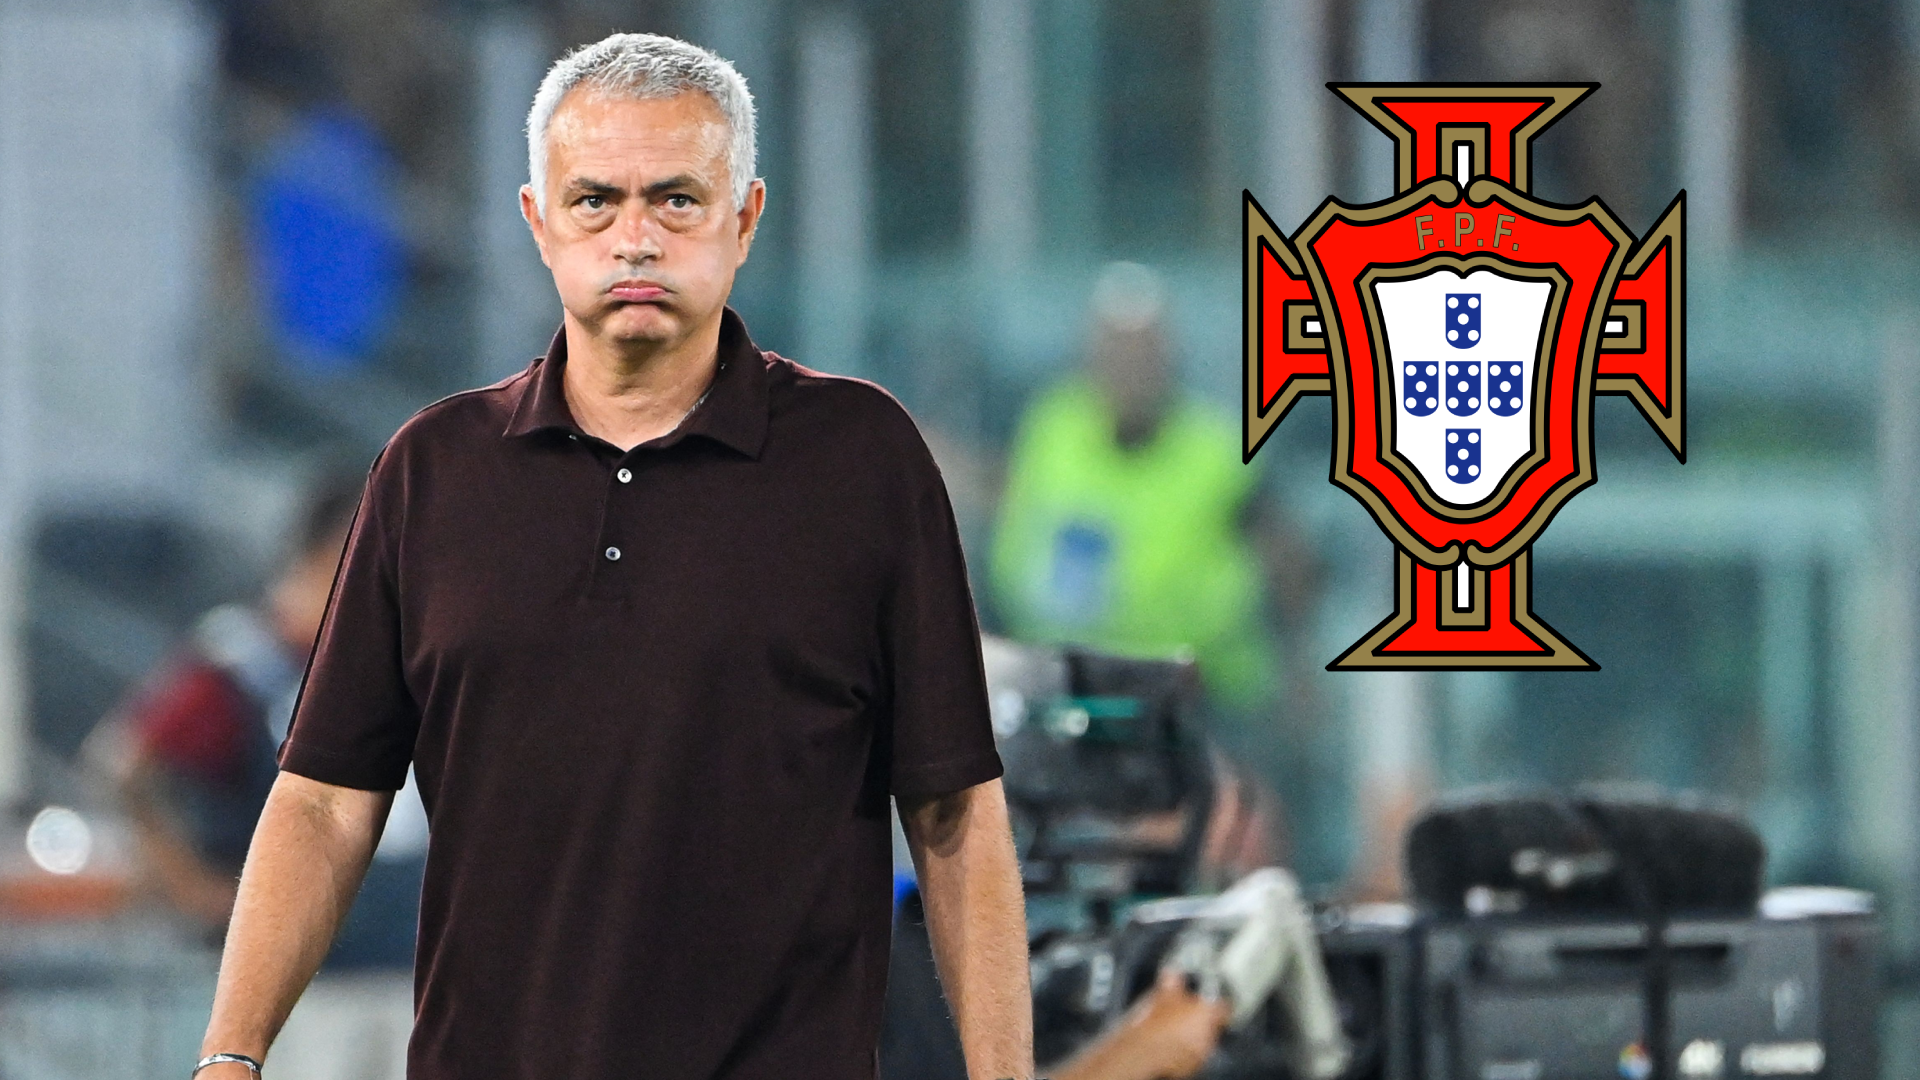 An incredible proposal from the Portuguese Federation for Jose Mourinho to become the coach of Portugal